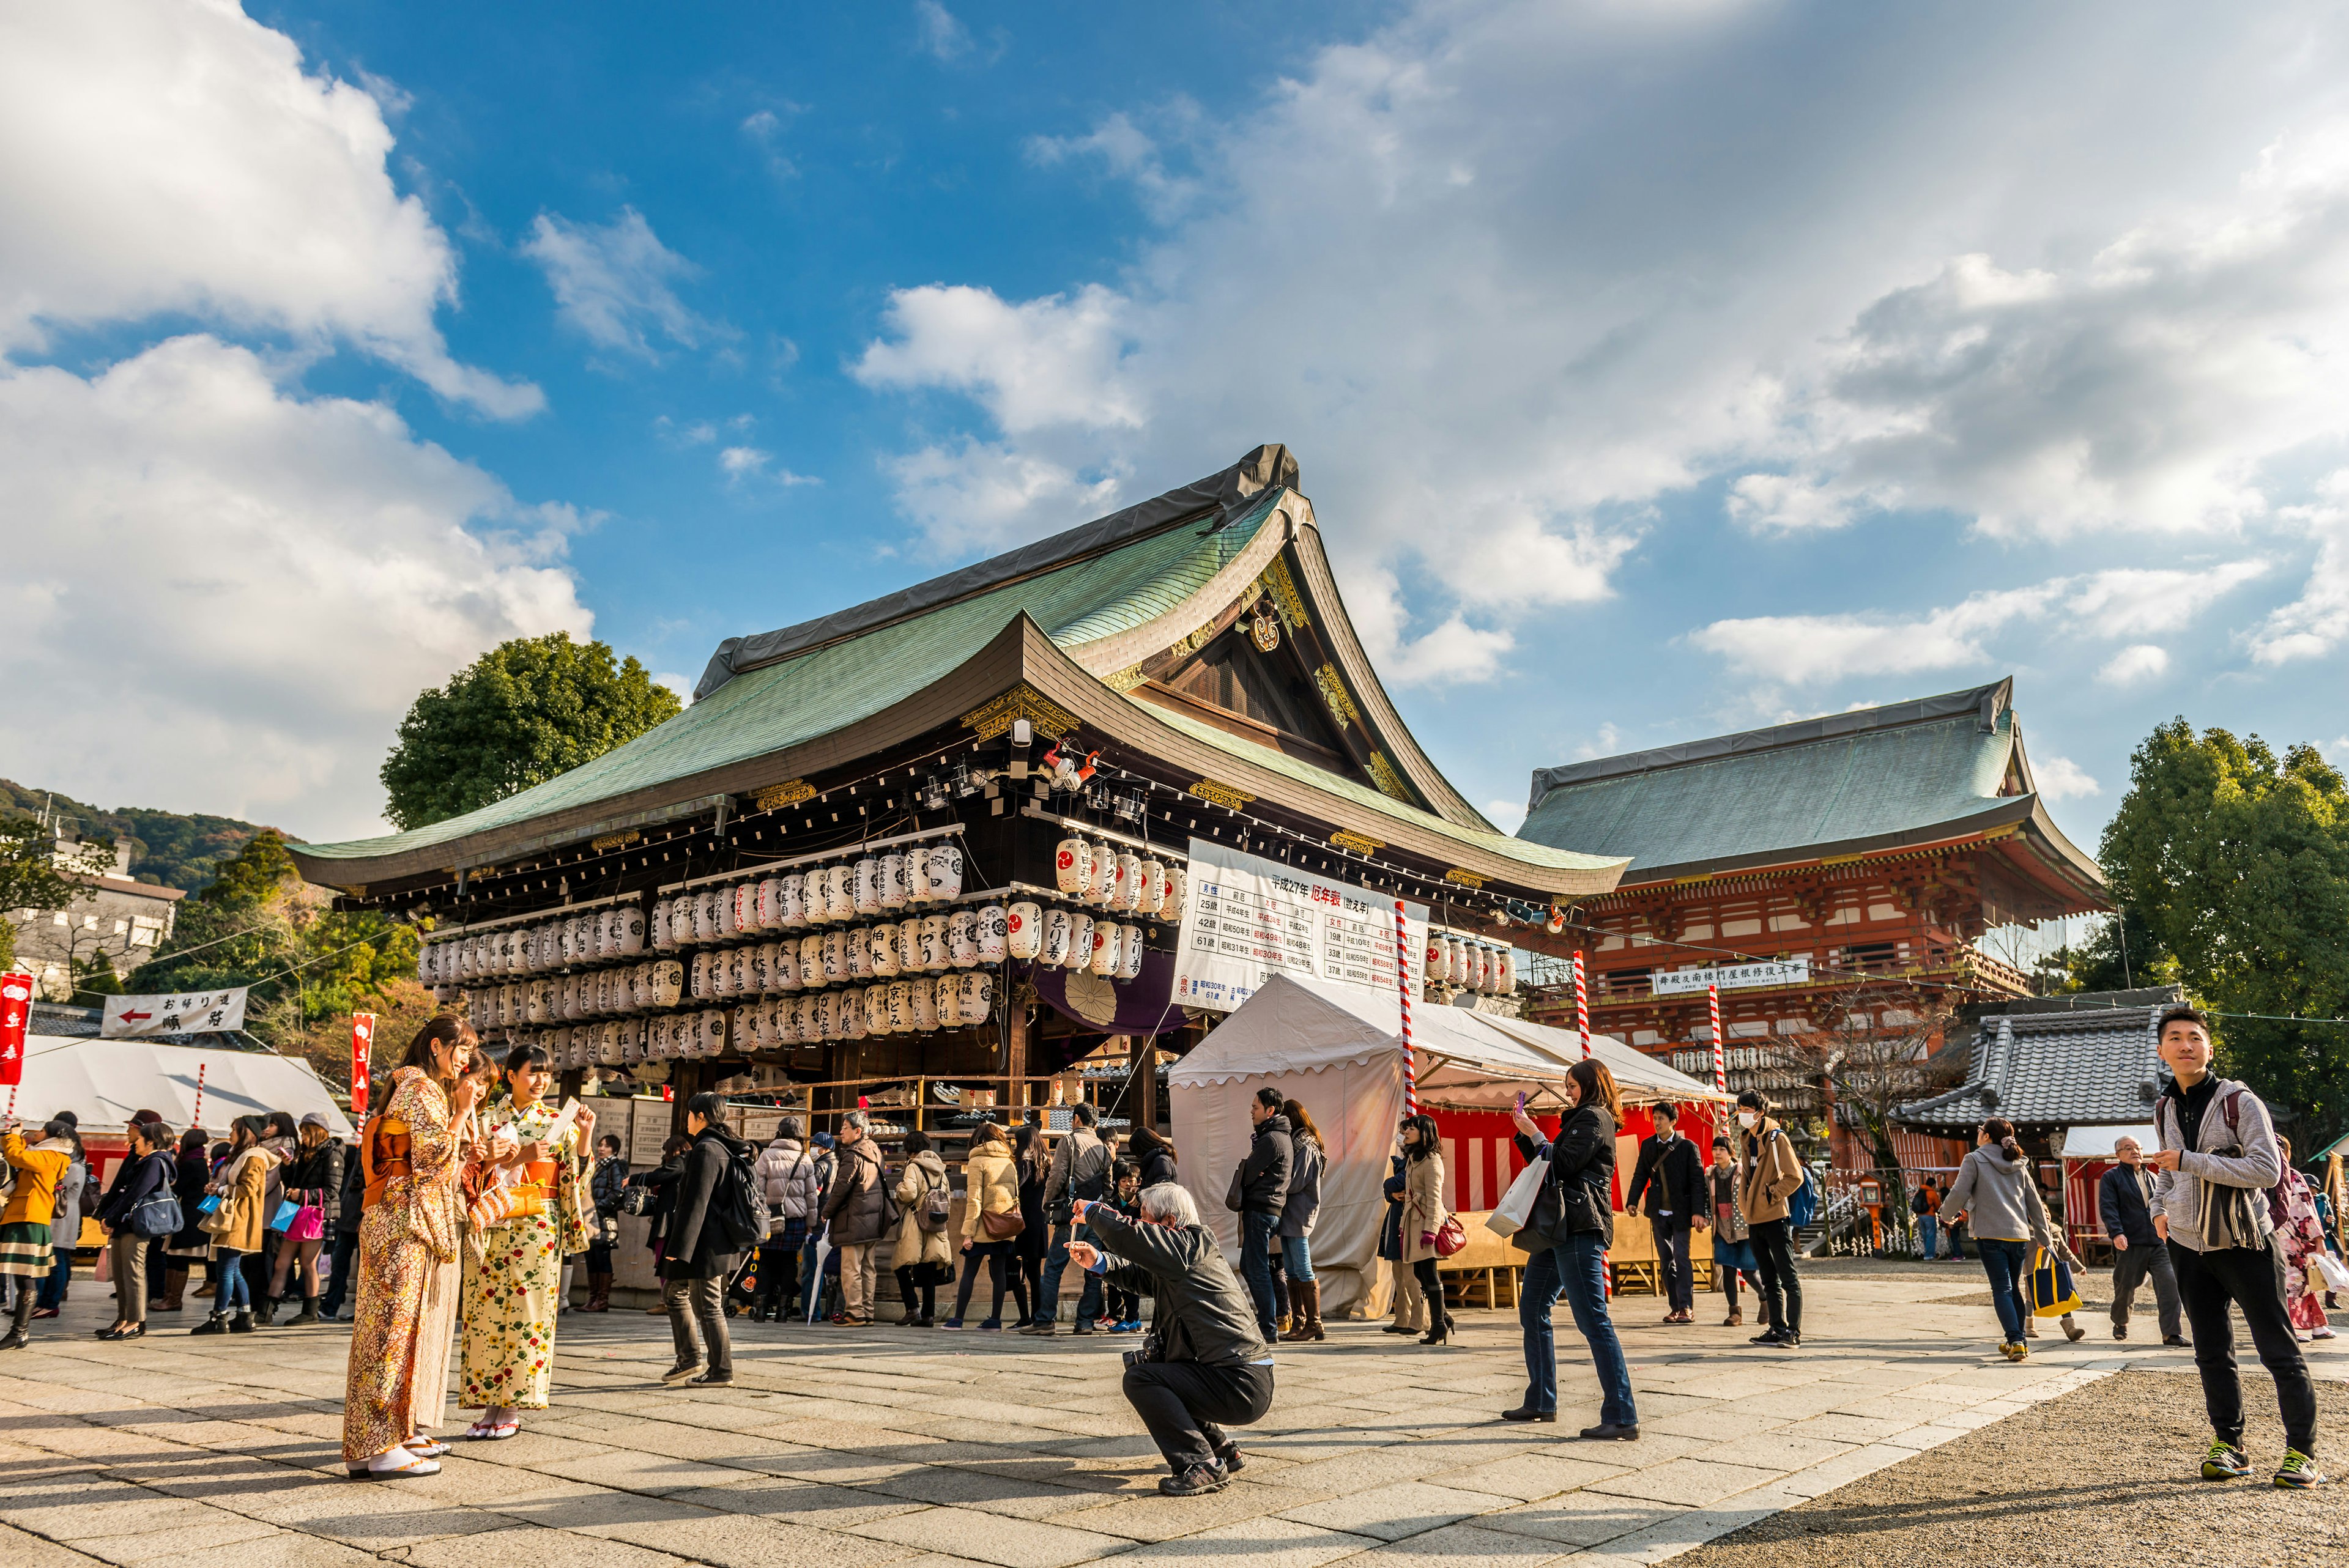 KYOTO, JAPAN - DECEMBER 29: Tourists and local Kyotoites explore the grounds of Yasaka Shrine on December 29, 2014 in Kyoto, Japan.